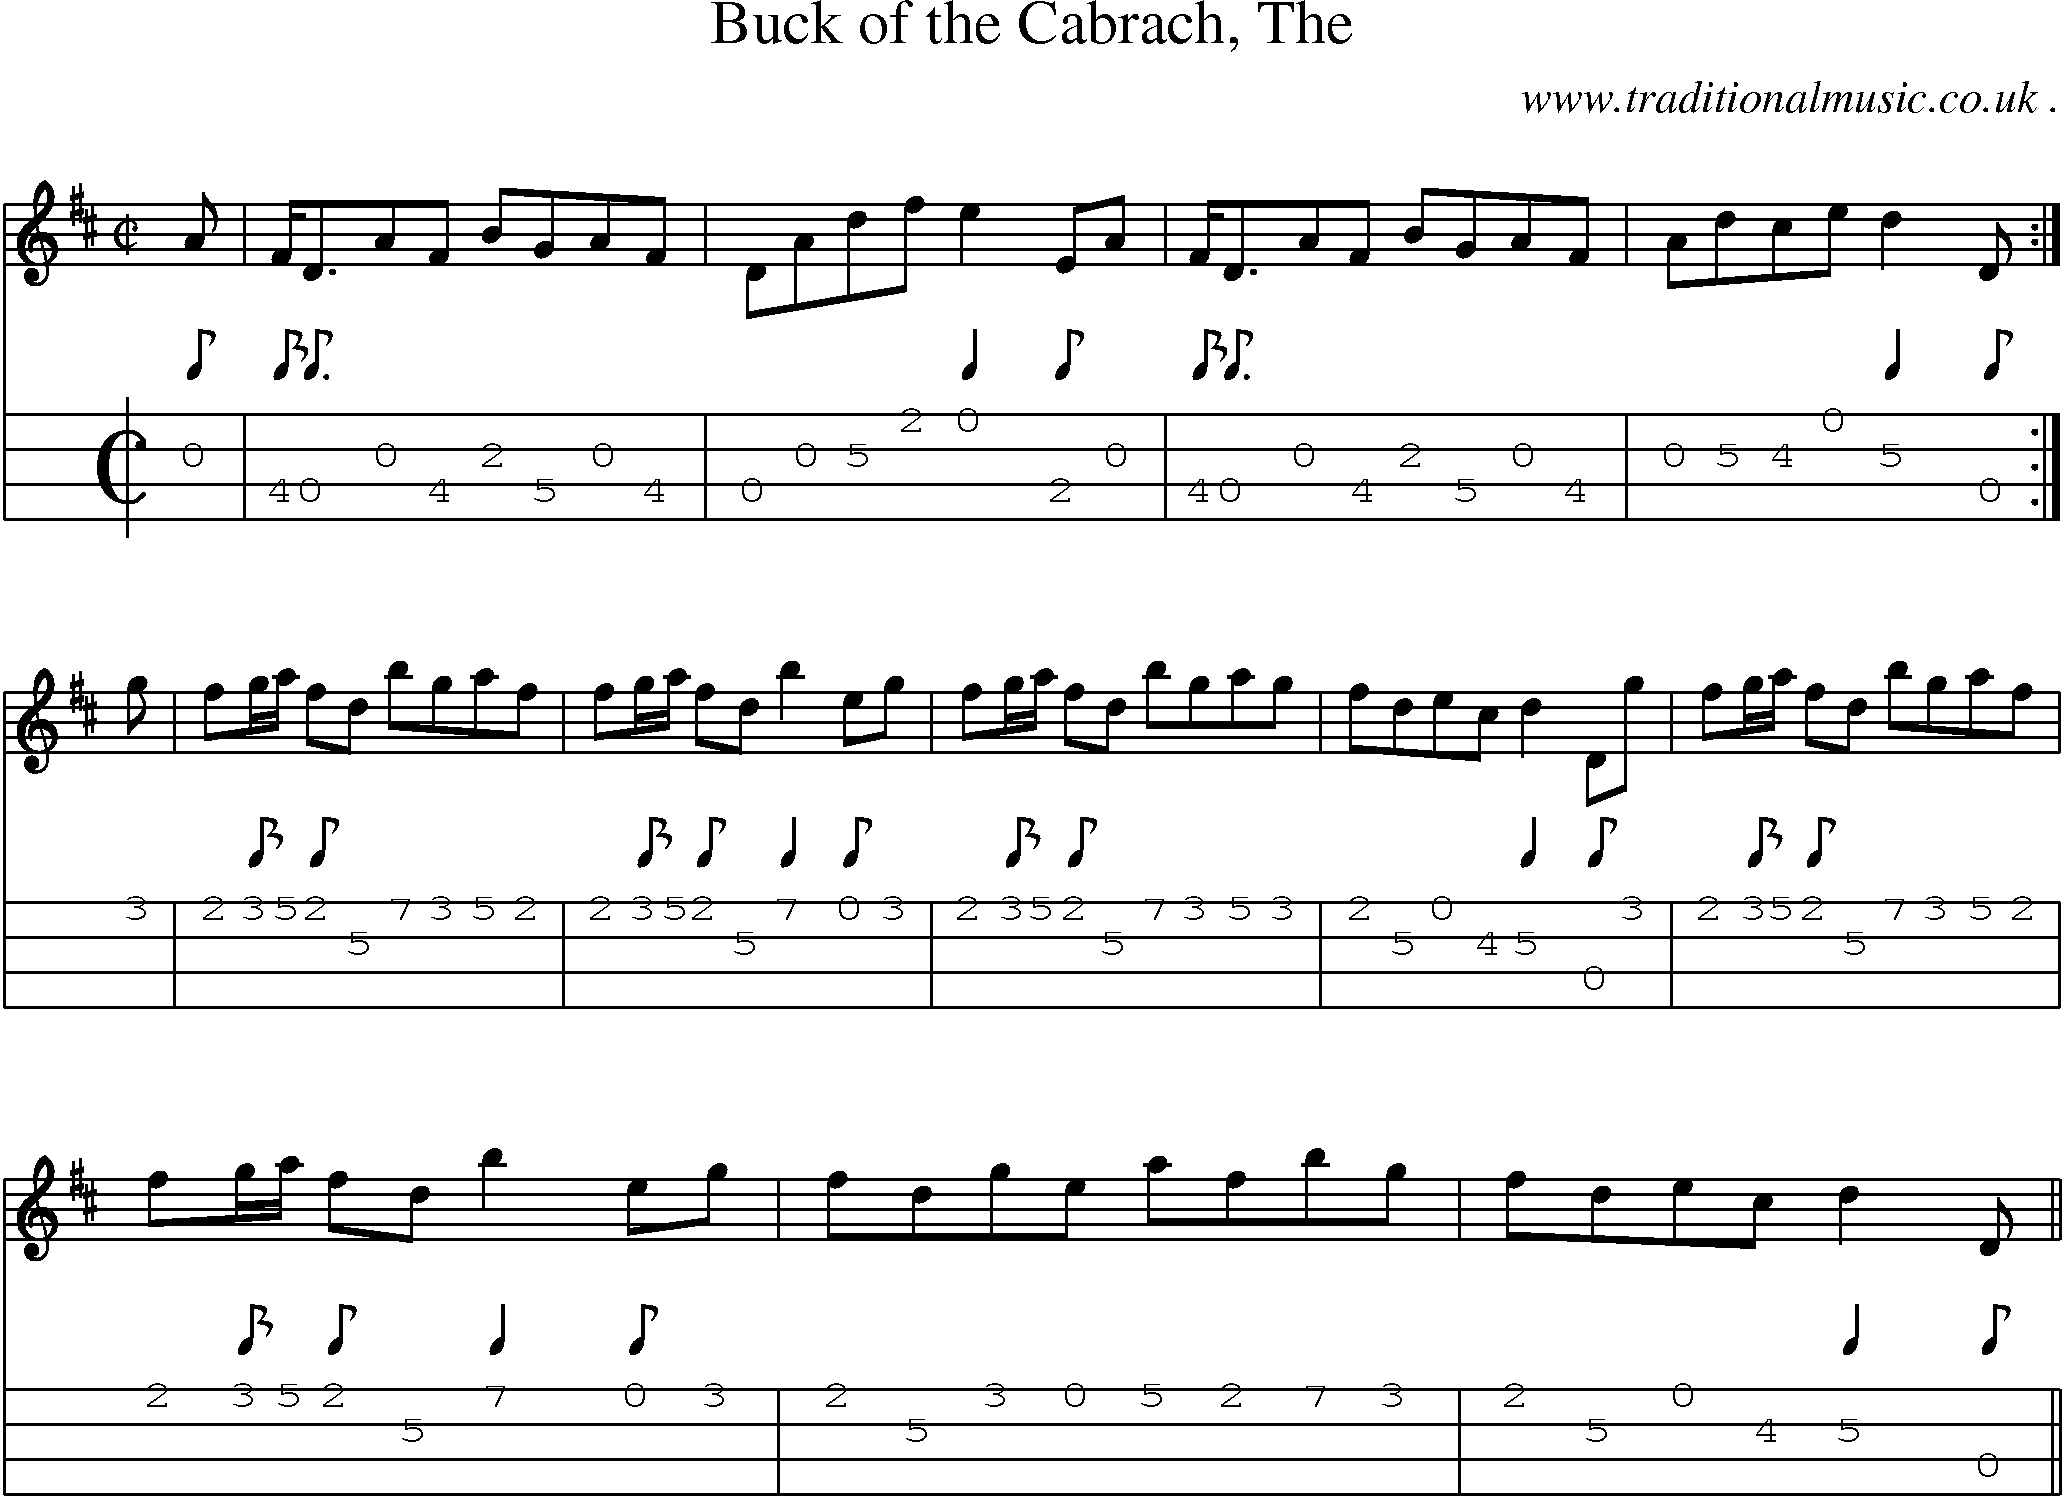 Sheet-music  score, Chords and Mandolin Tabs for Buck Of The Cabrach The